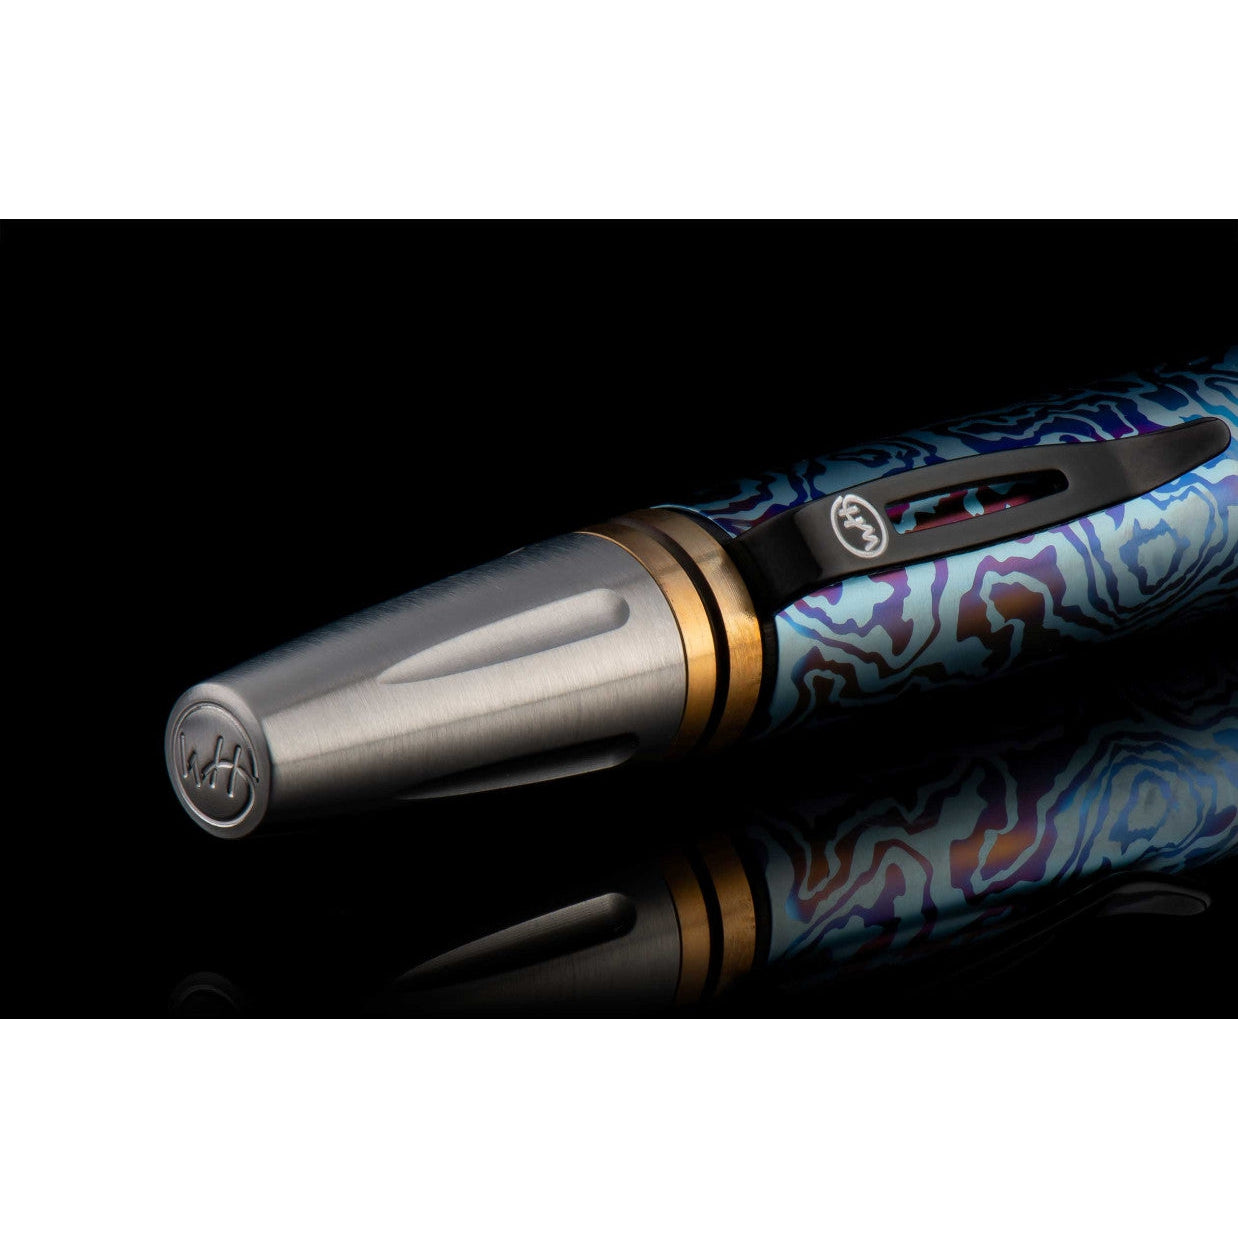 William Henry Caribe 9 Writing Instrument-Home/Giftware-Kevin's Fine Outdoor Gear & Apparel